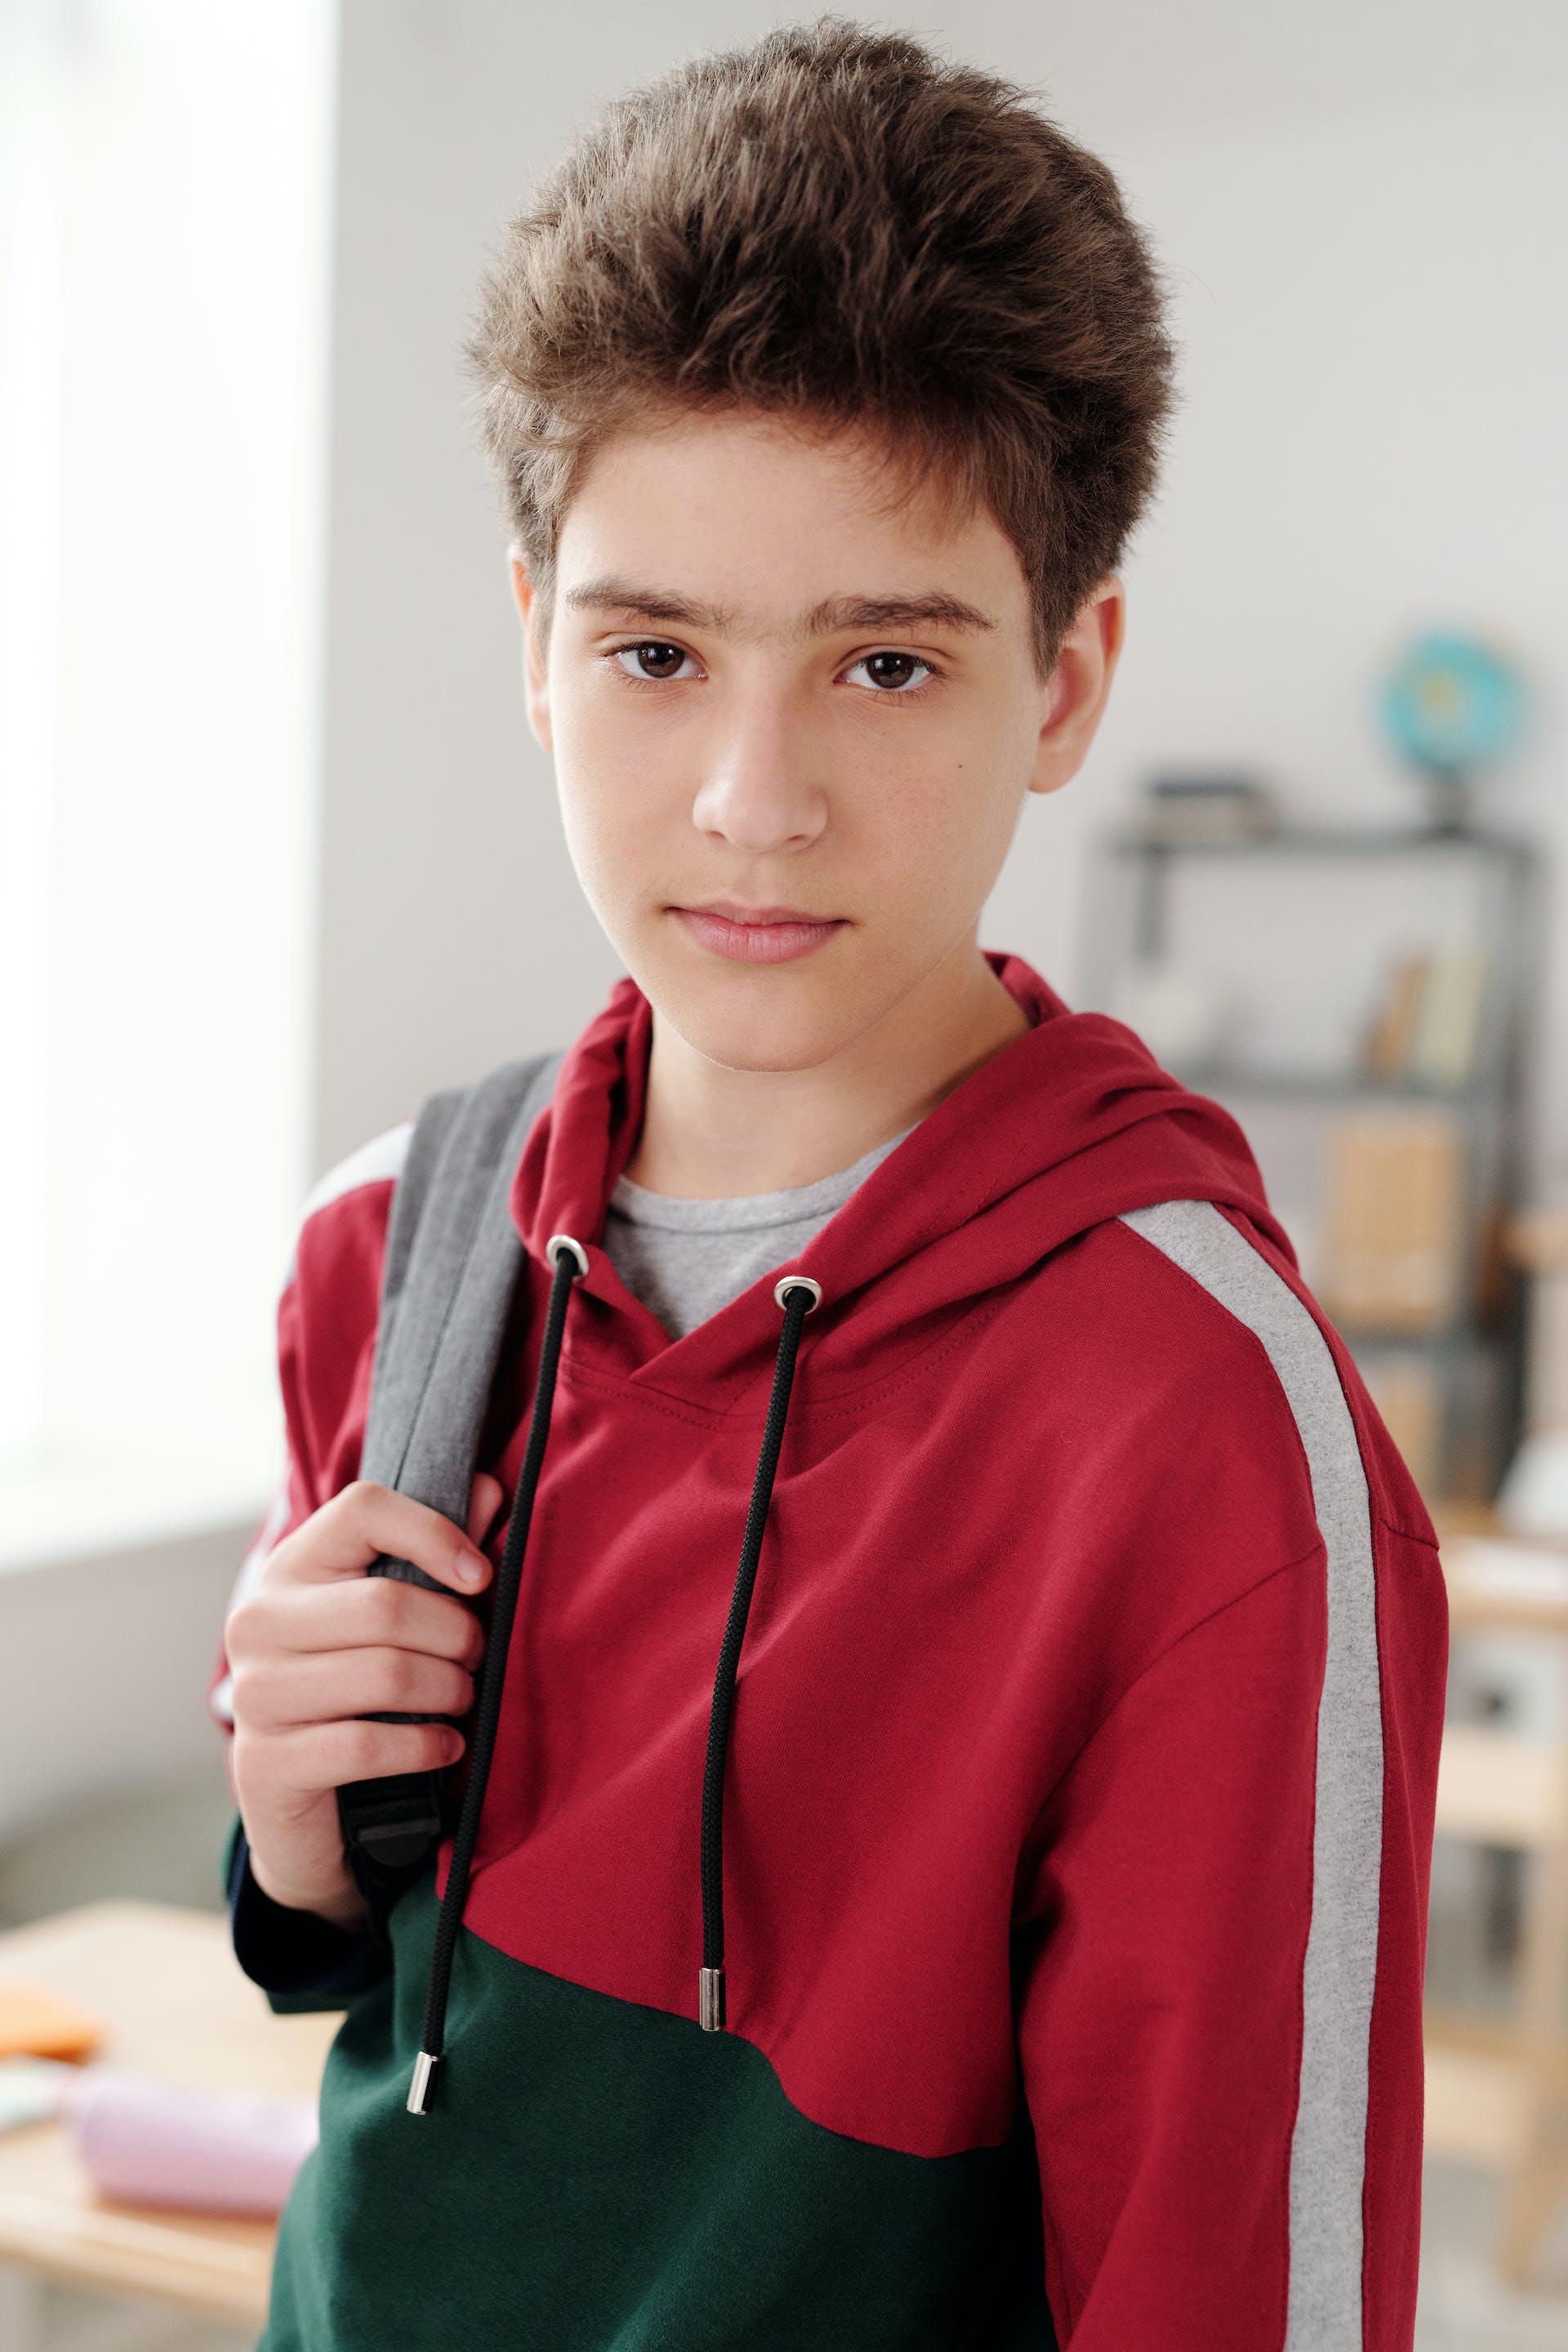 A young boy with a bag on his shoulder | Source: Pexels